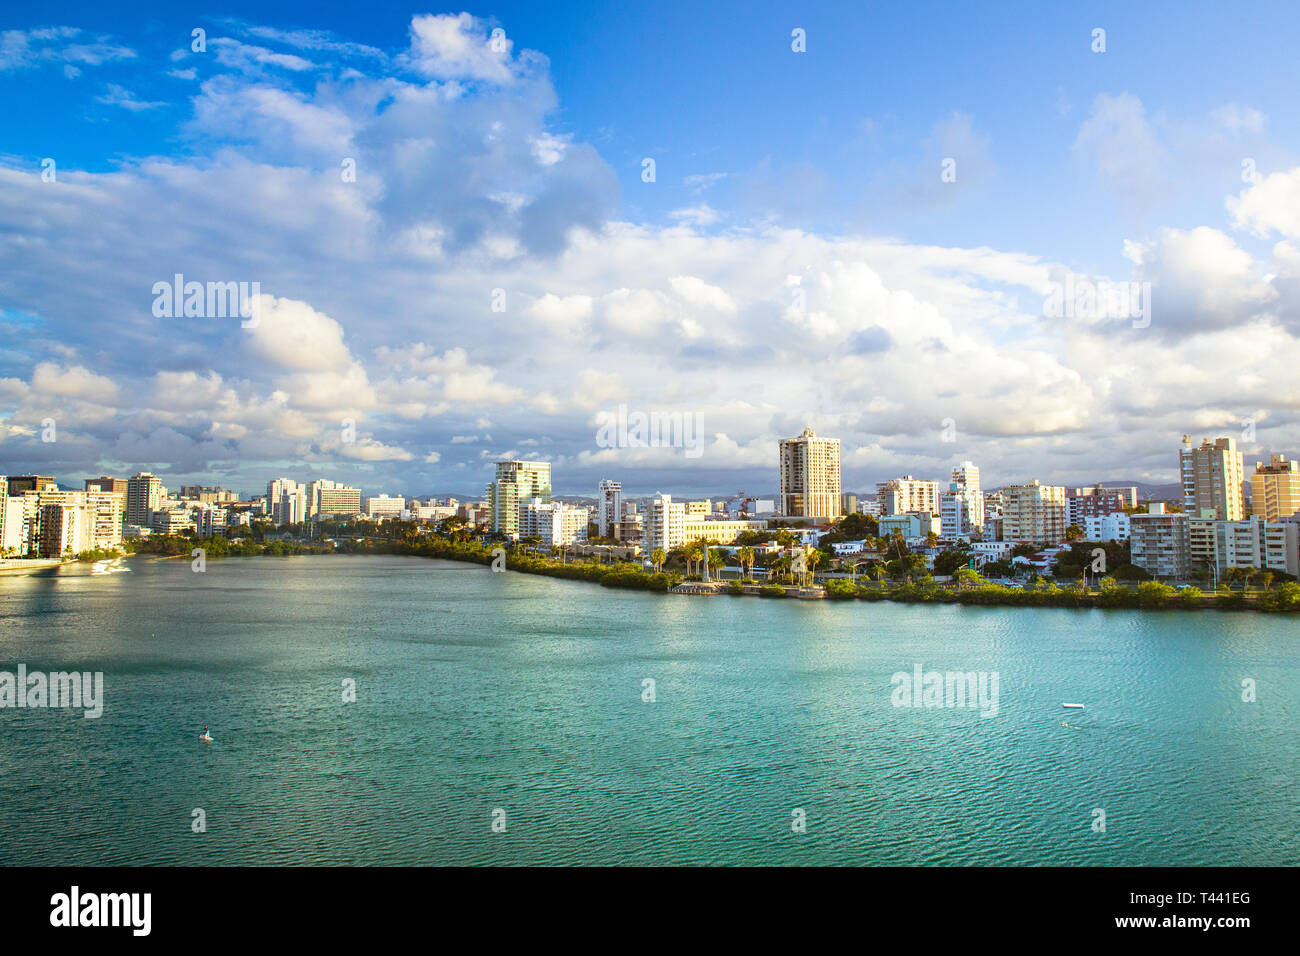 View of Condado area of San Juan Puerto Rico with bay and buildings on a day with clouds and sun Stock Photo